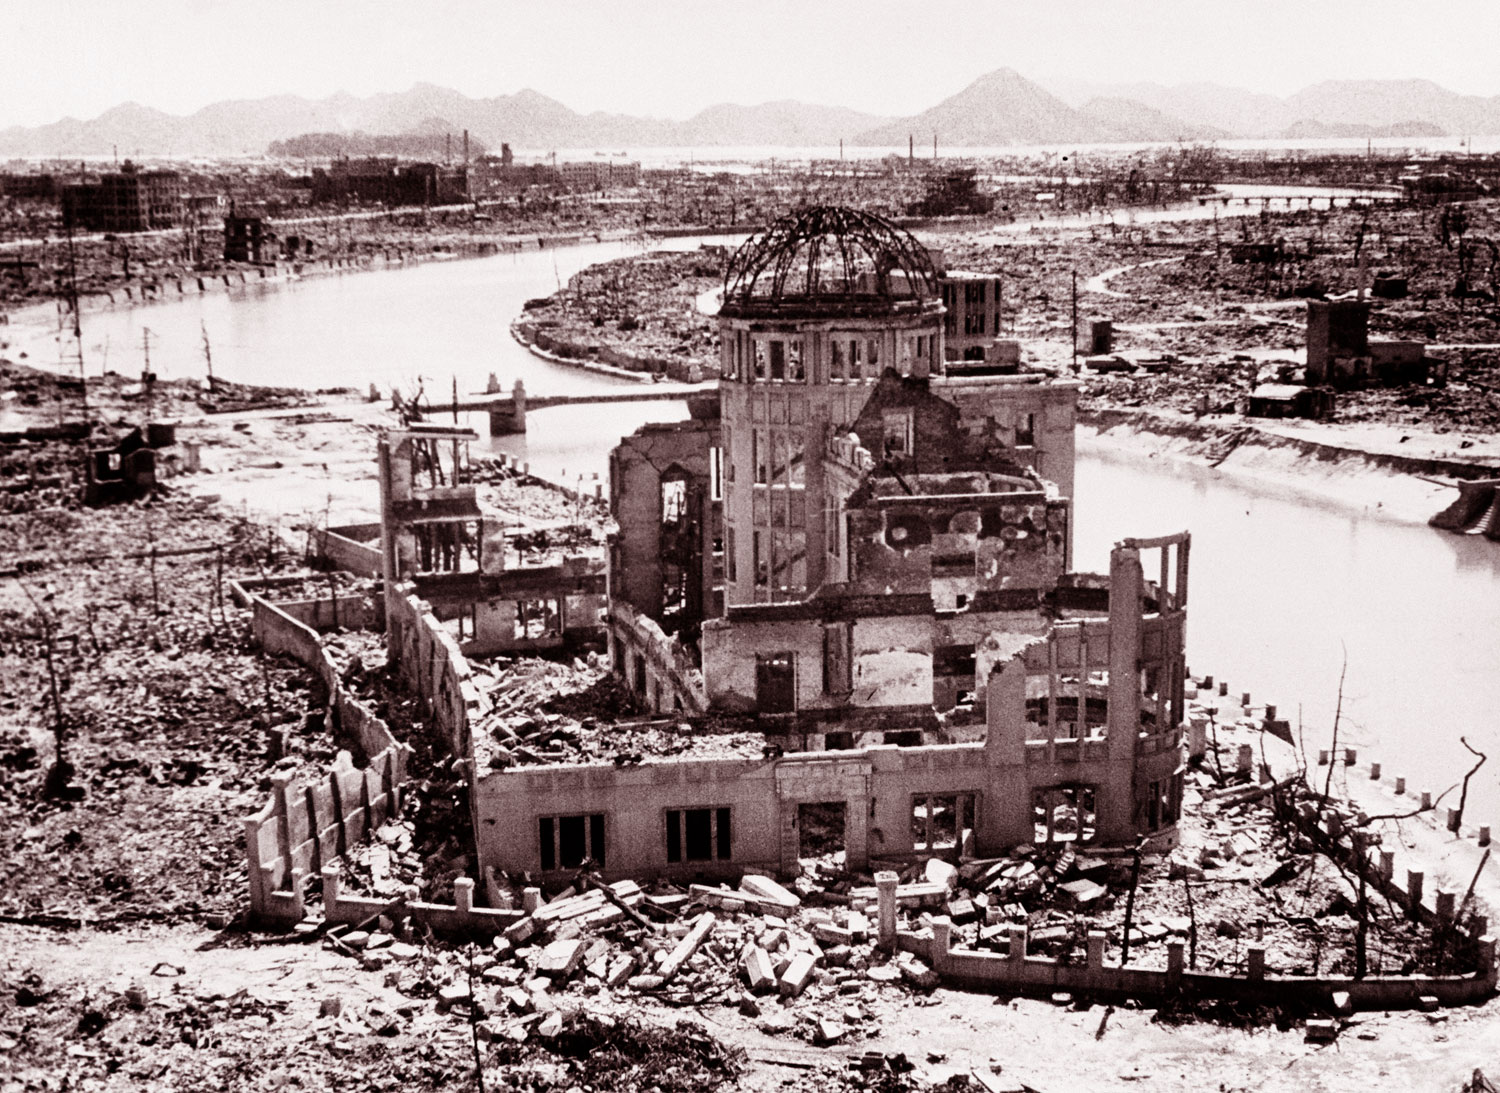 The remains of the Prefectural Industry Promotion Building, later preserved as a monument - known as the Genbaku Dome - at the Hiroshima Peace Memorial. (Image credit United Nations)